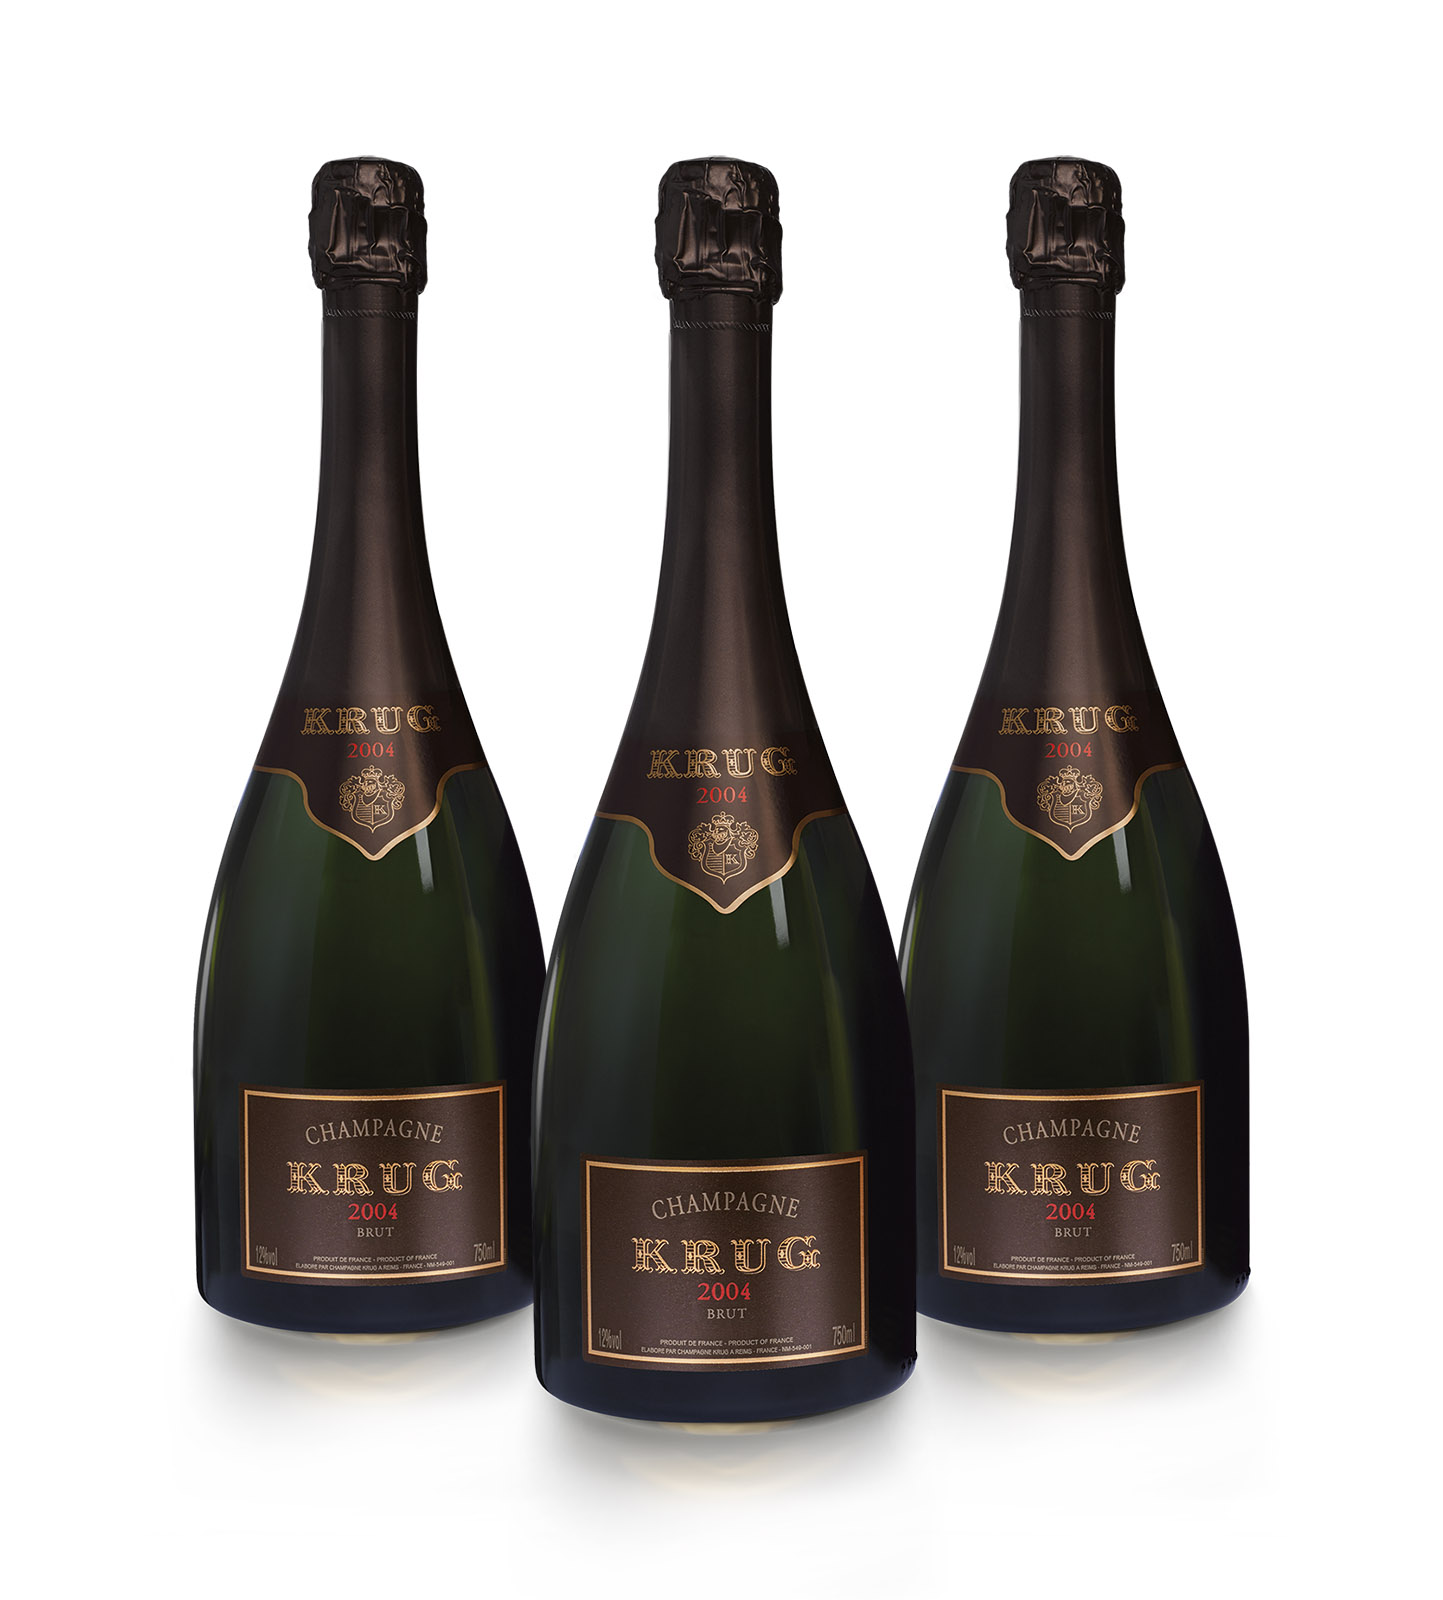 KRUG champagne Cathay pacific